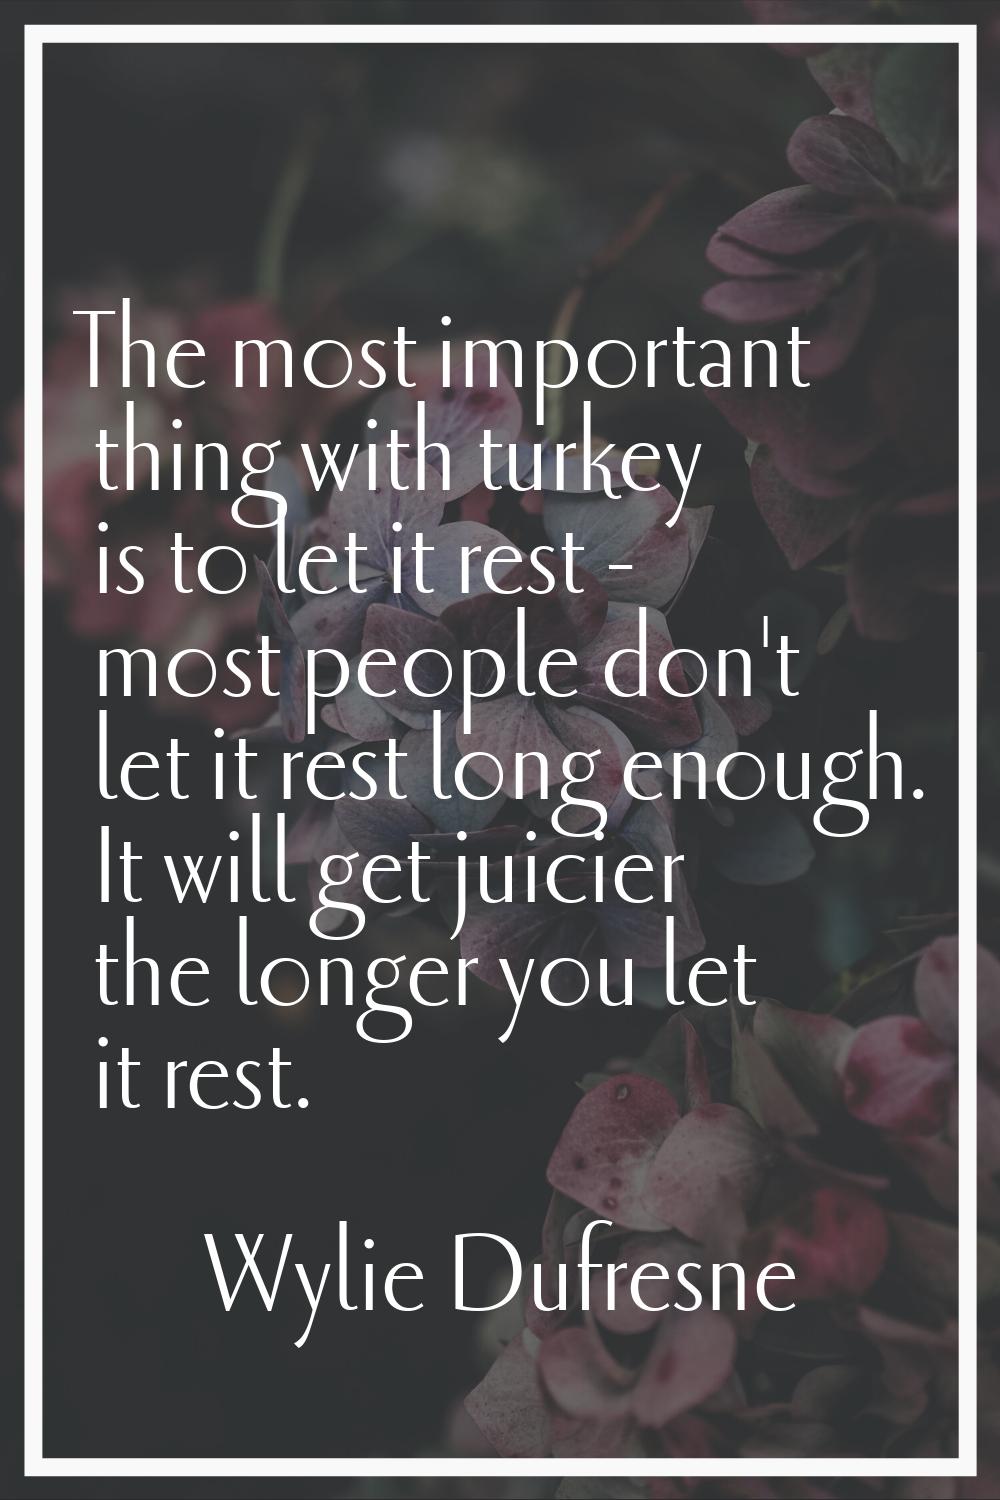 The most important thing with turkey is to let it rest - most people don't let it rest long enough.